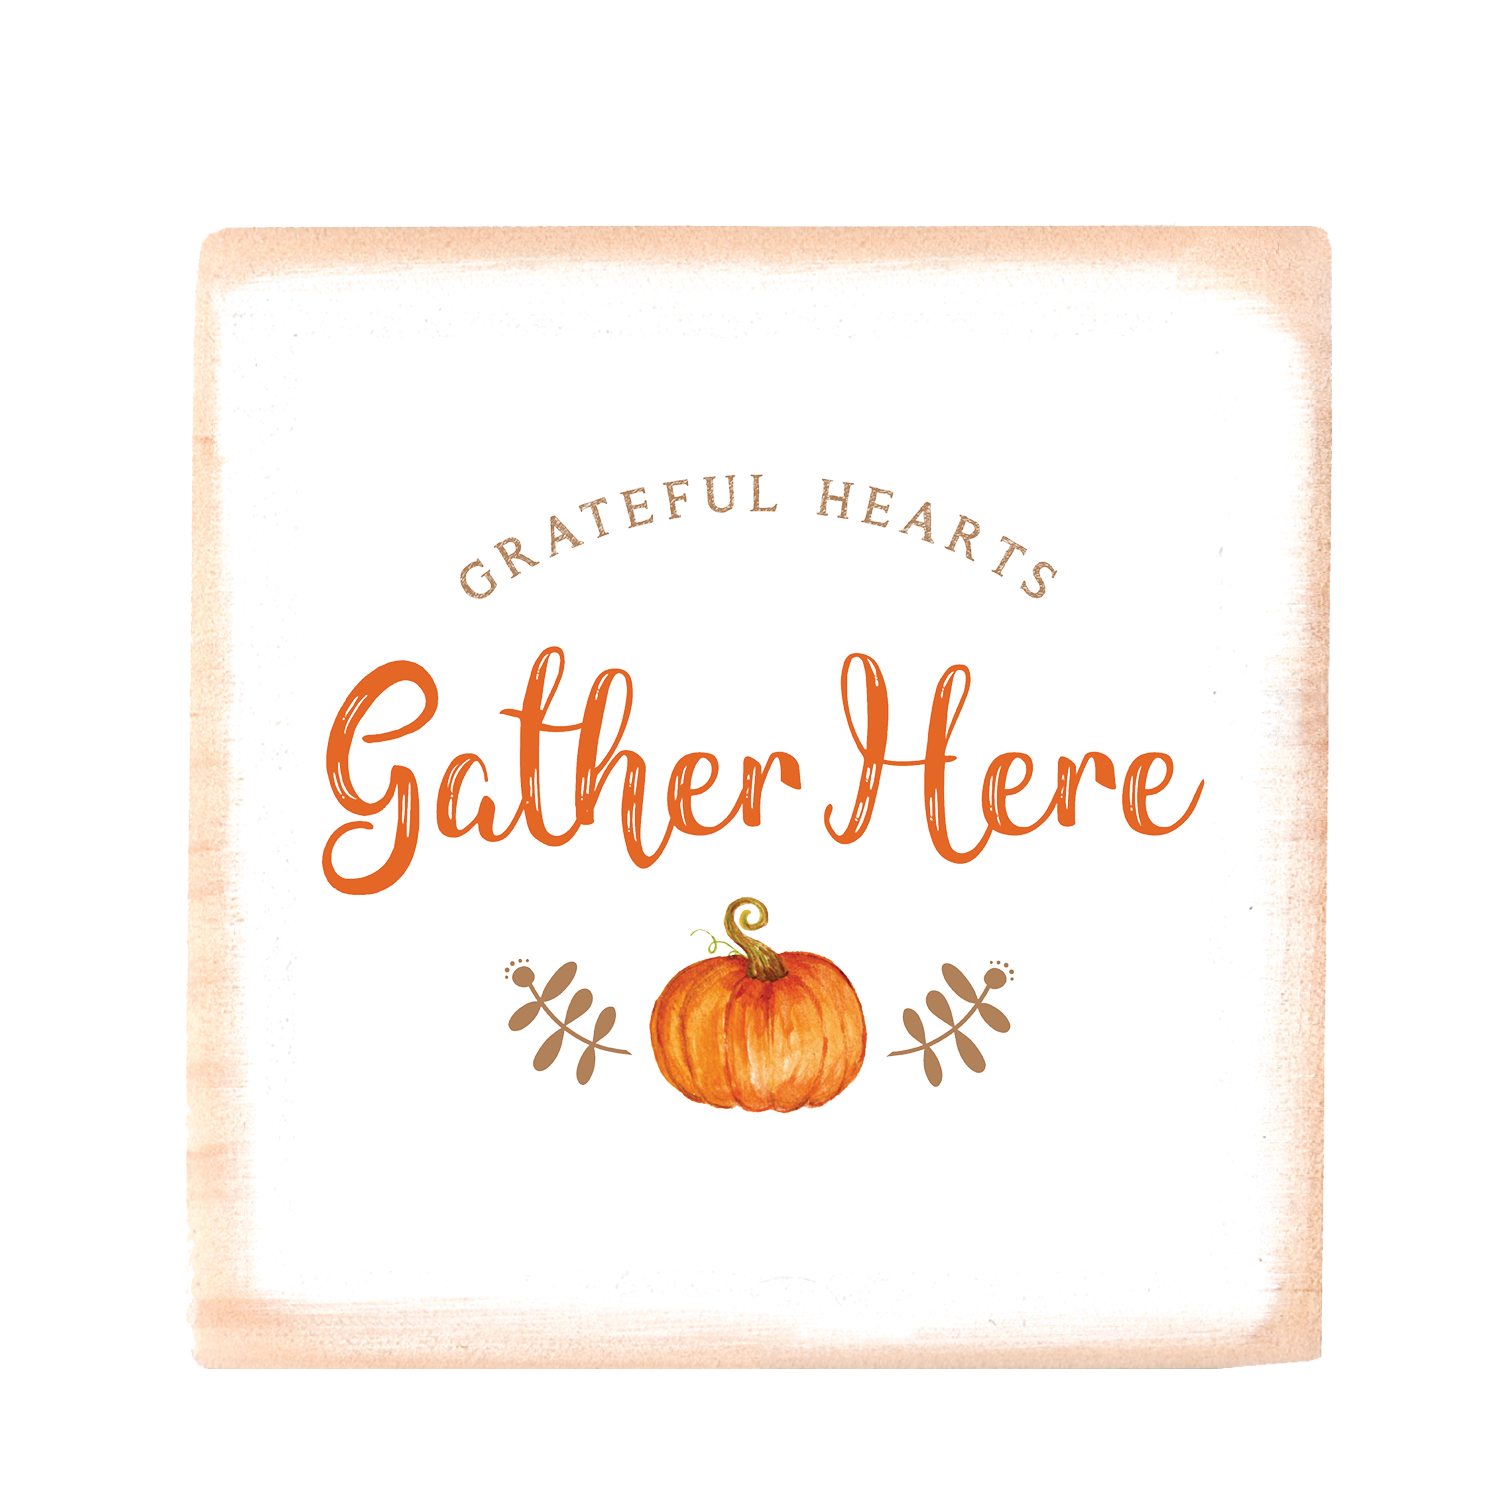 grateful hearts gather here square wood block